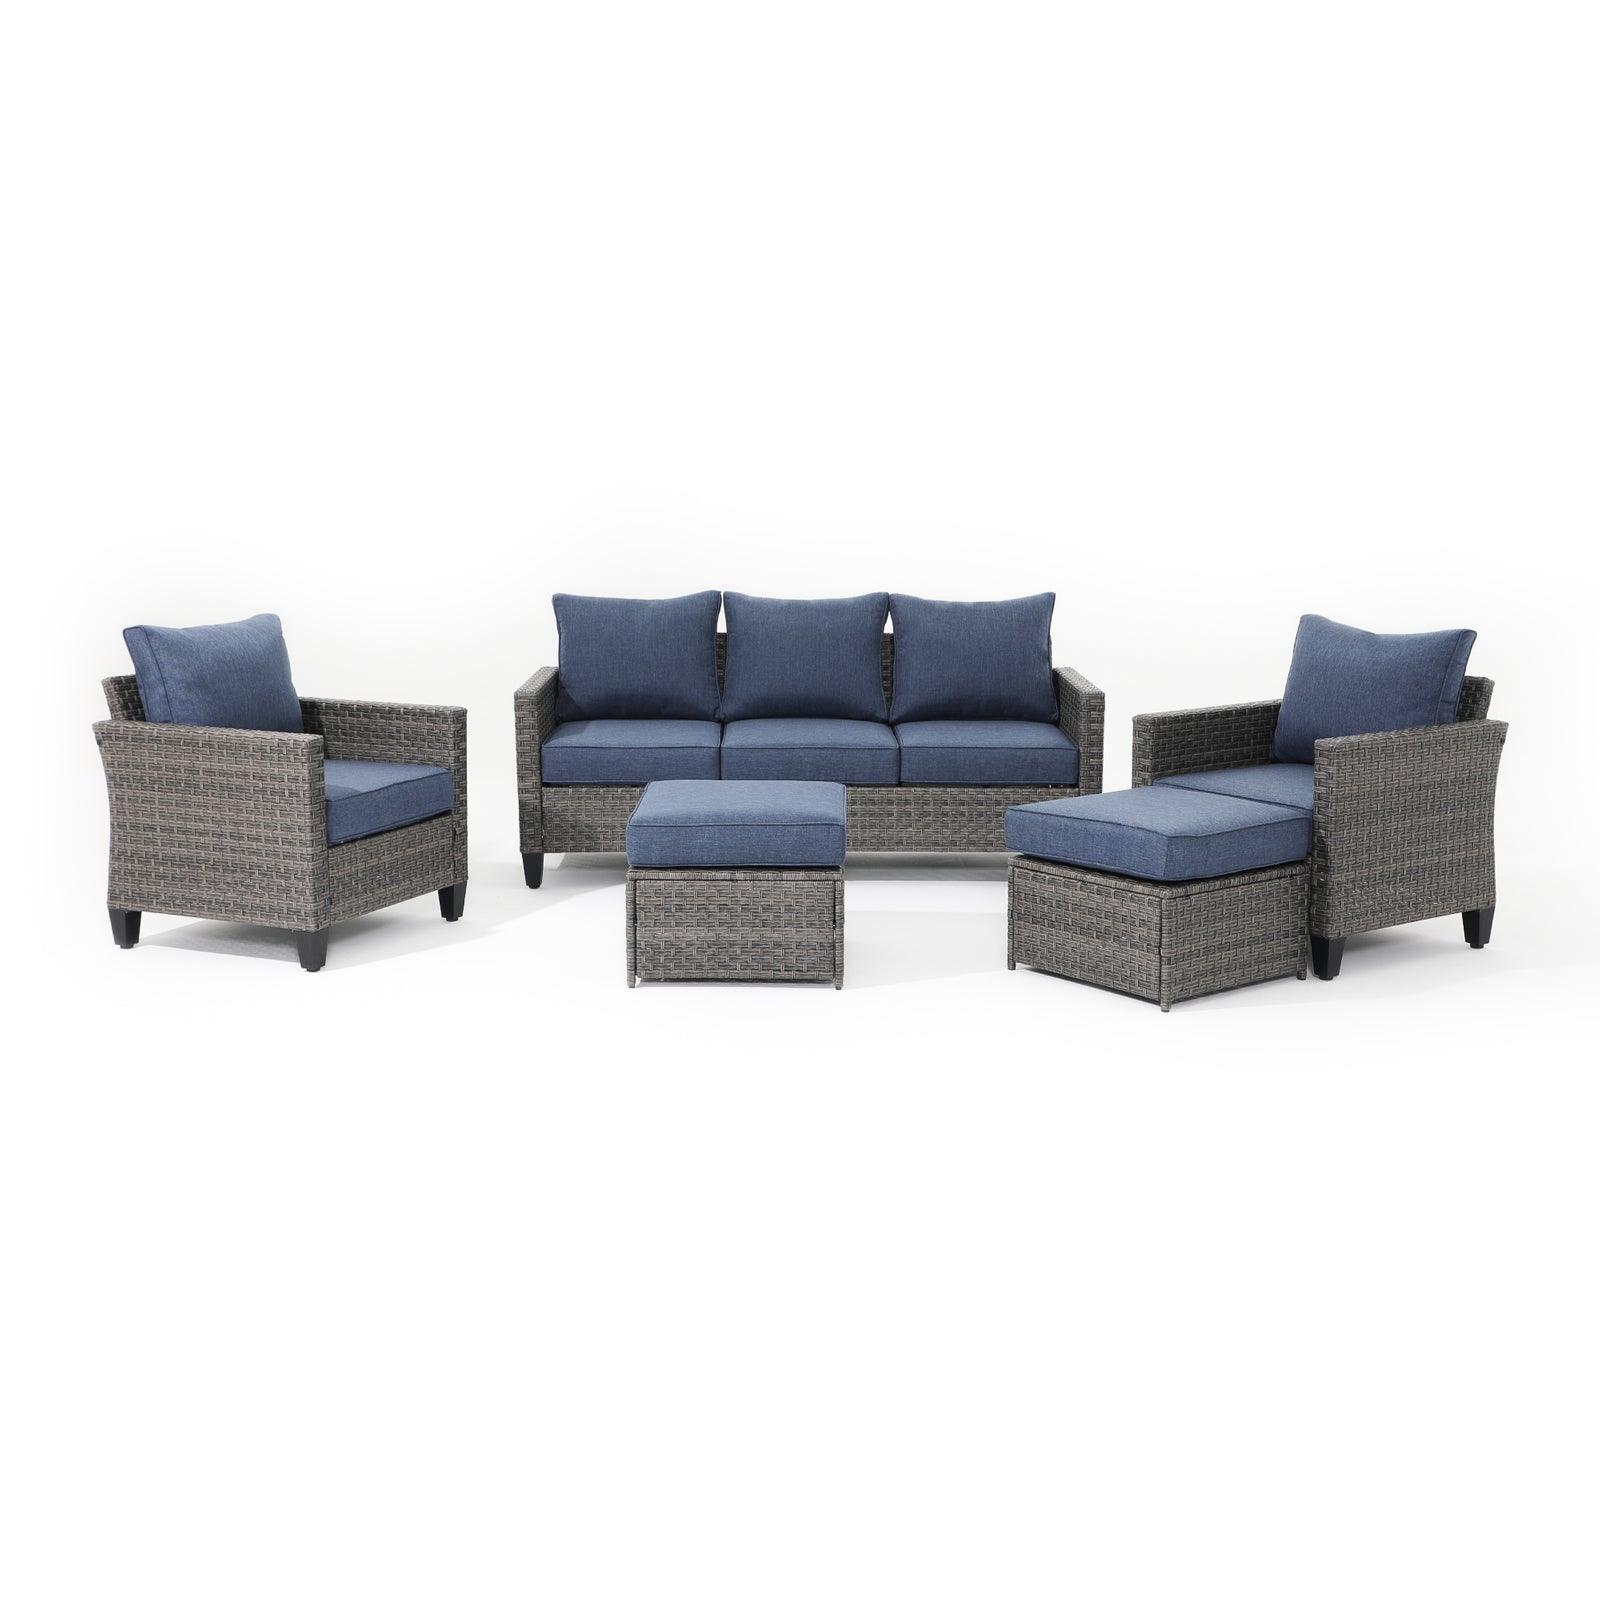 Ayia 5-Piece grey wicker outdoor Sofa Set with Navy Blue cushions, a 3-seater sofa, 2 arm chairs , 2 ottomans - Jardina Furniture#Piece_5-pc#Color_Navy Blue#Style_with Ottomans